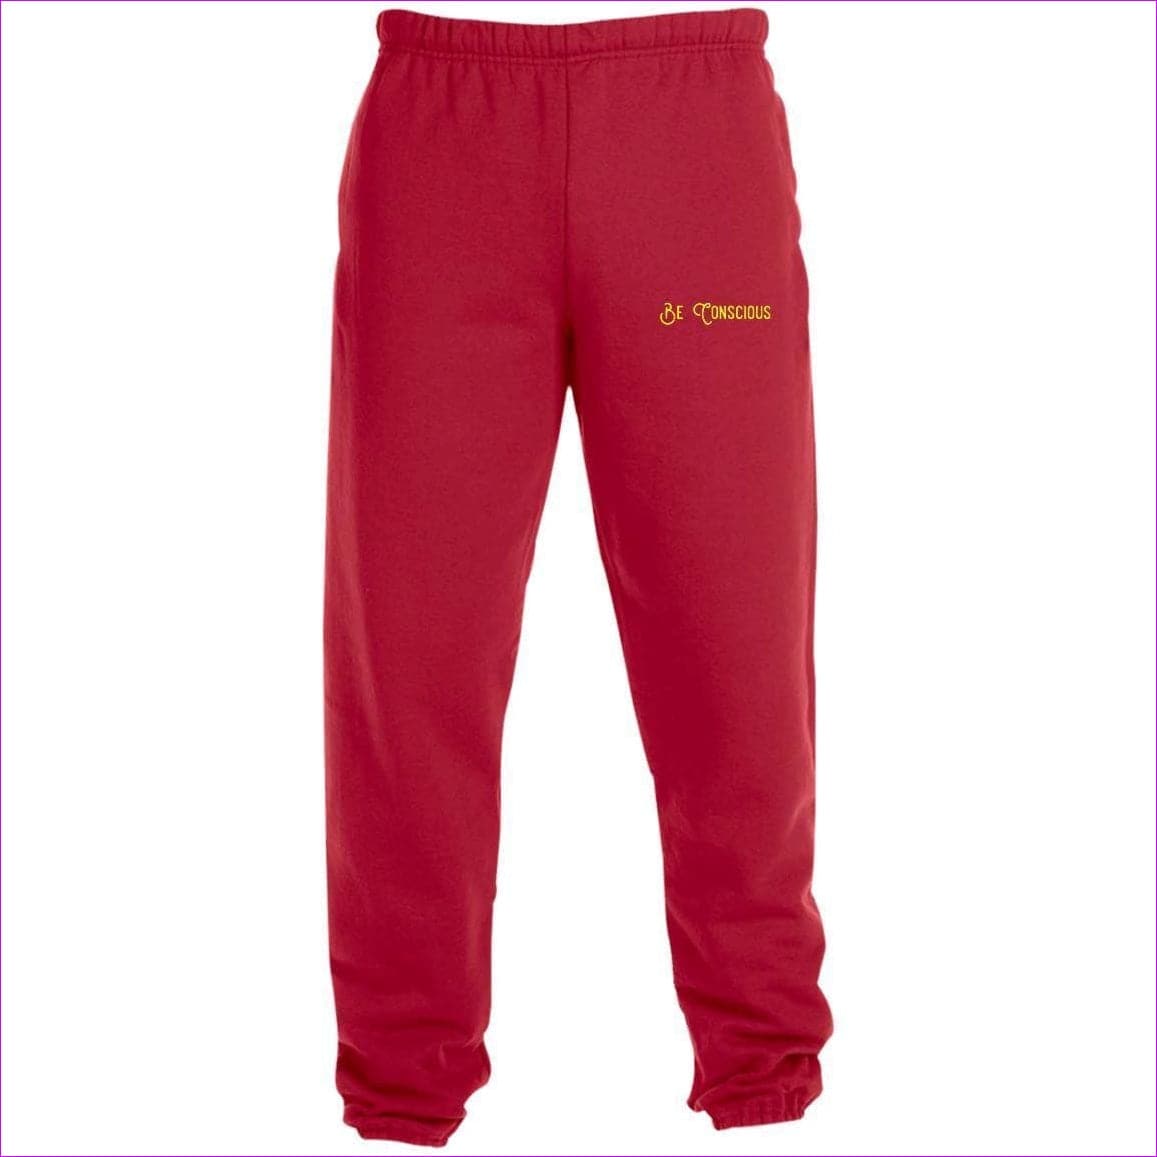 True Red Be Conscious Sweatpants with Pockets - men's sweatpants at TFC&H Co.